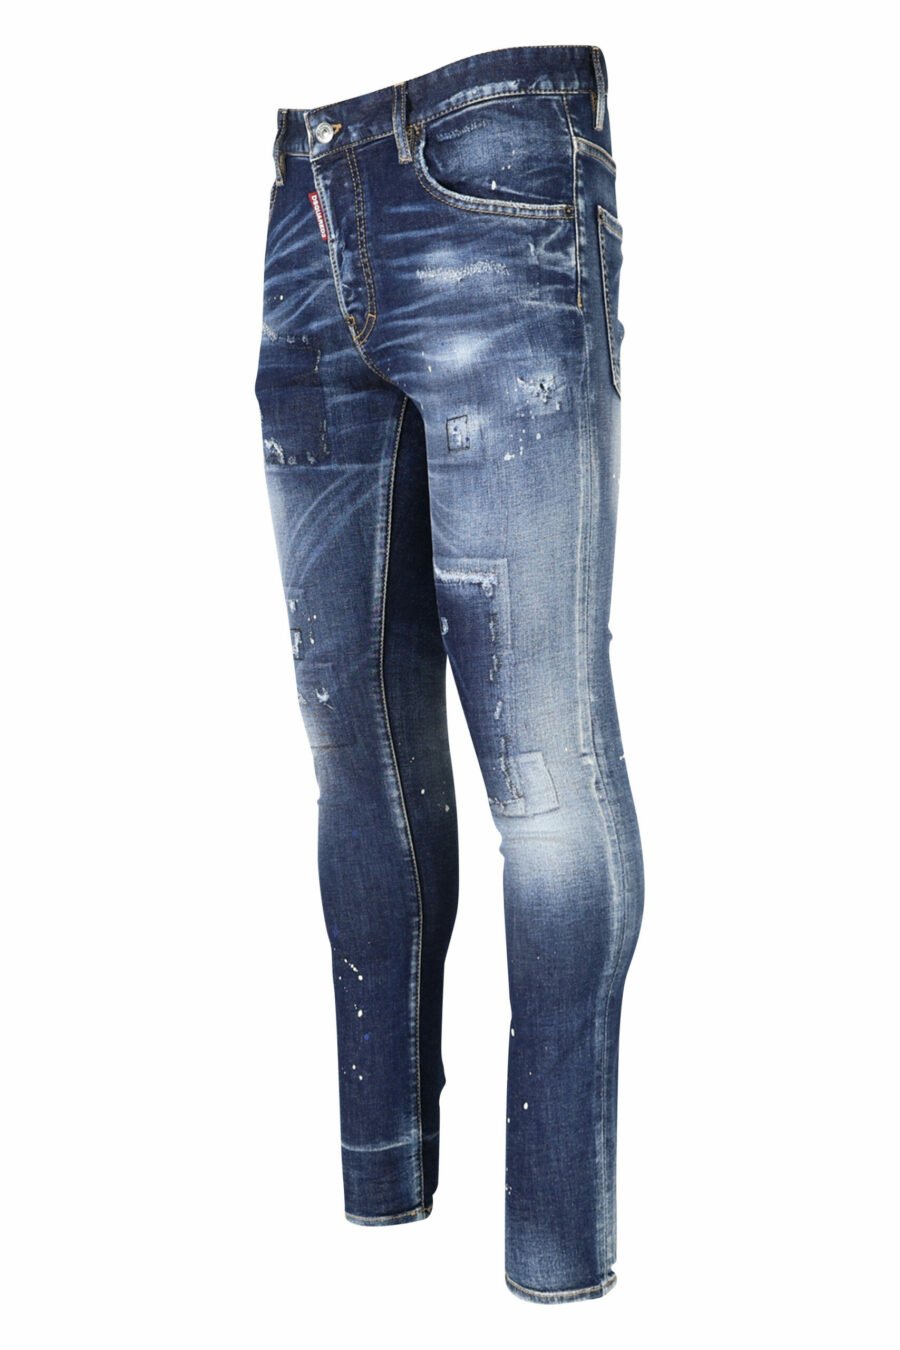 Blue "super twinky jean" jeans with patch and frayed - 8054148104863 1 scaled